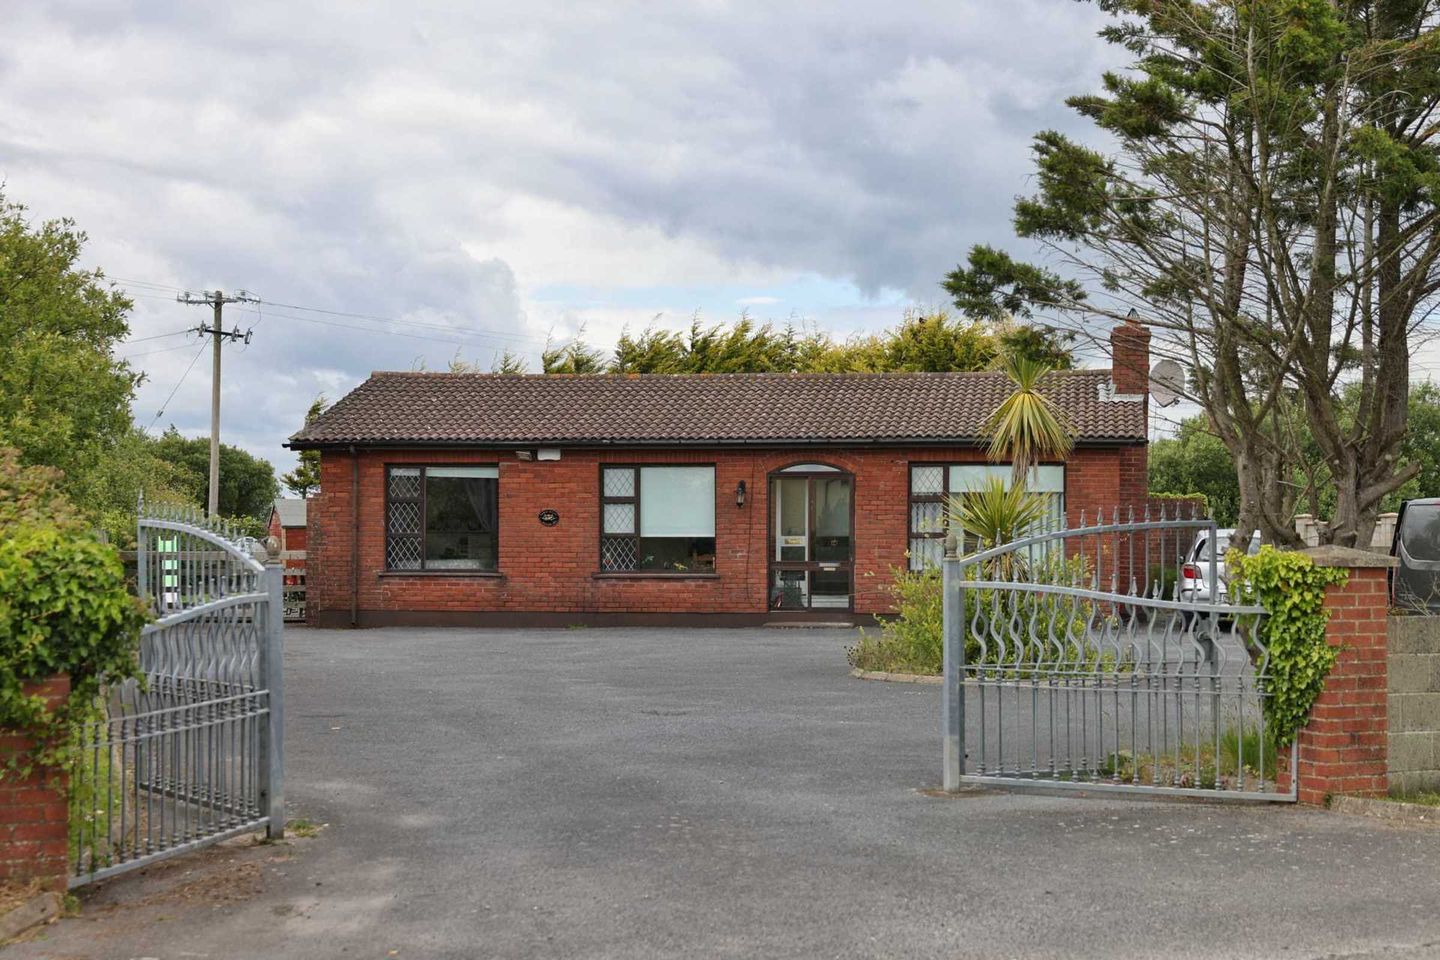 Tamalaught, Grange Rd, Rosslare Strand, Wexford Town, Co. Wexford, Y35NX38